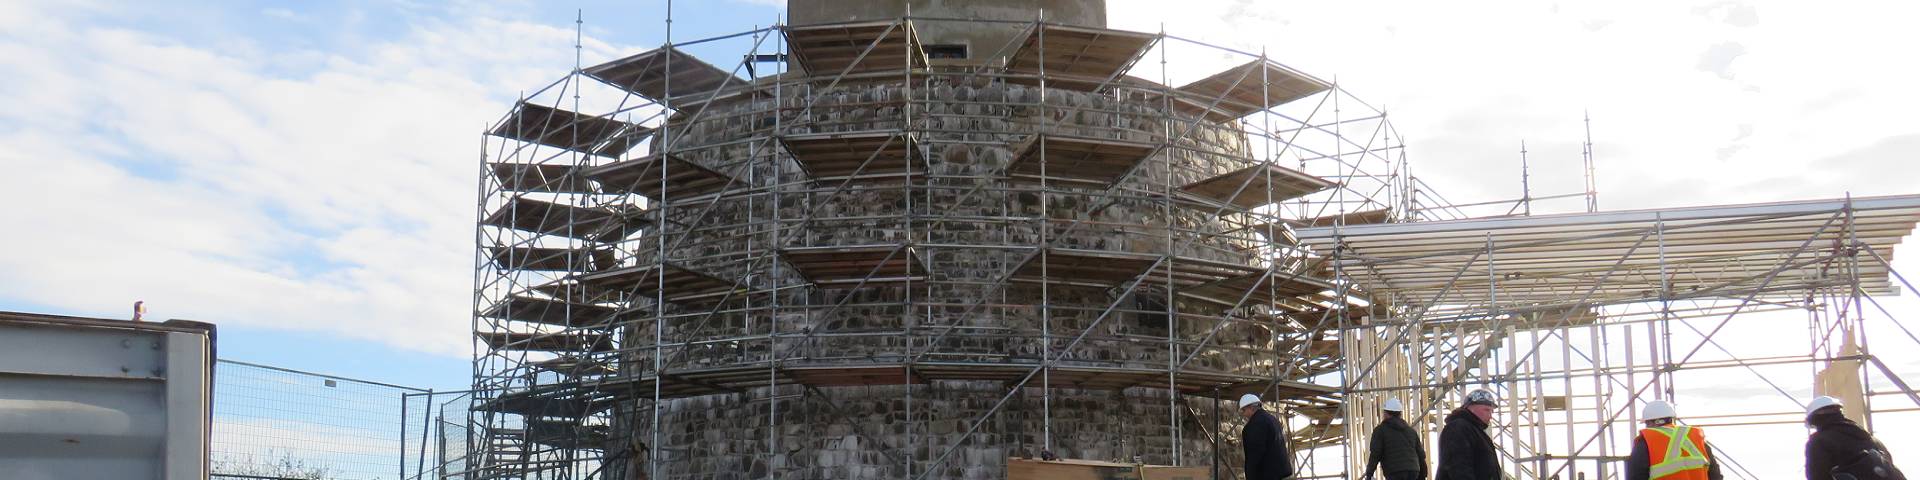 Scaffoldings around the tower